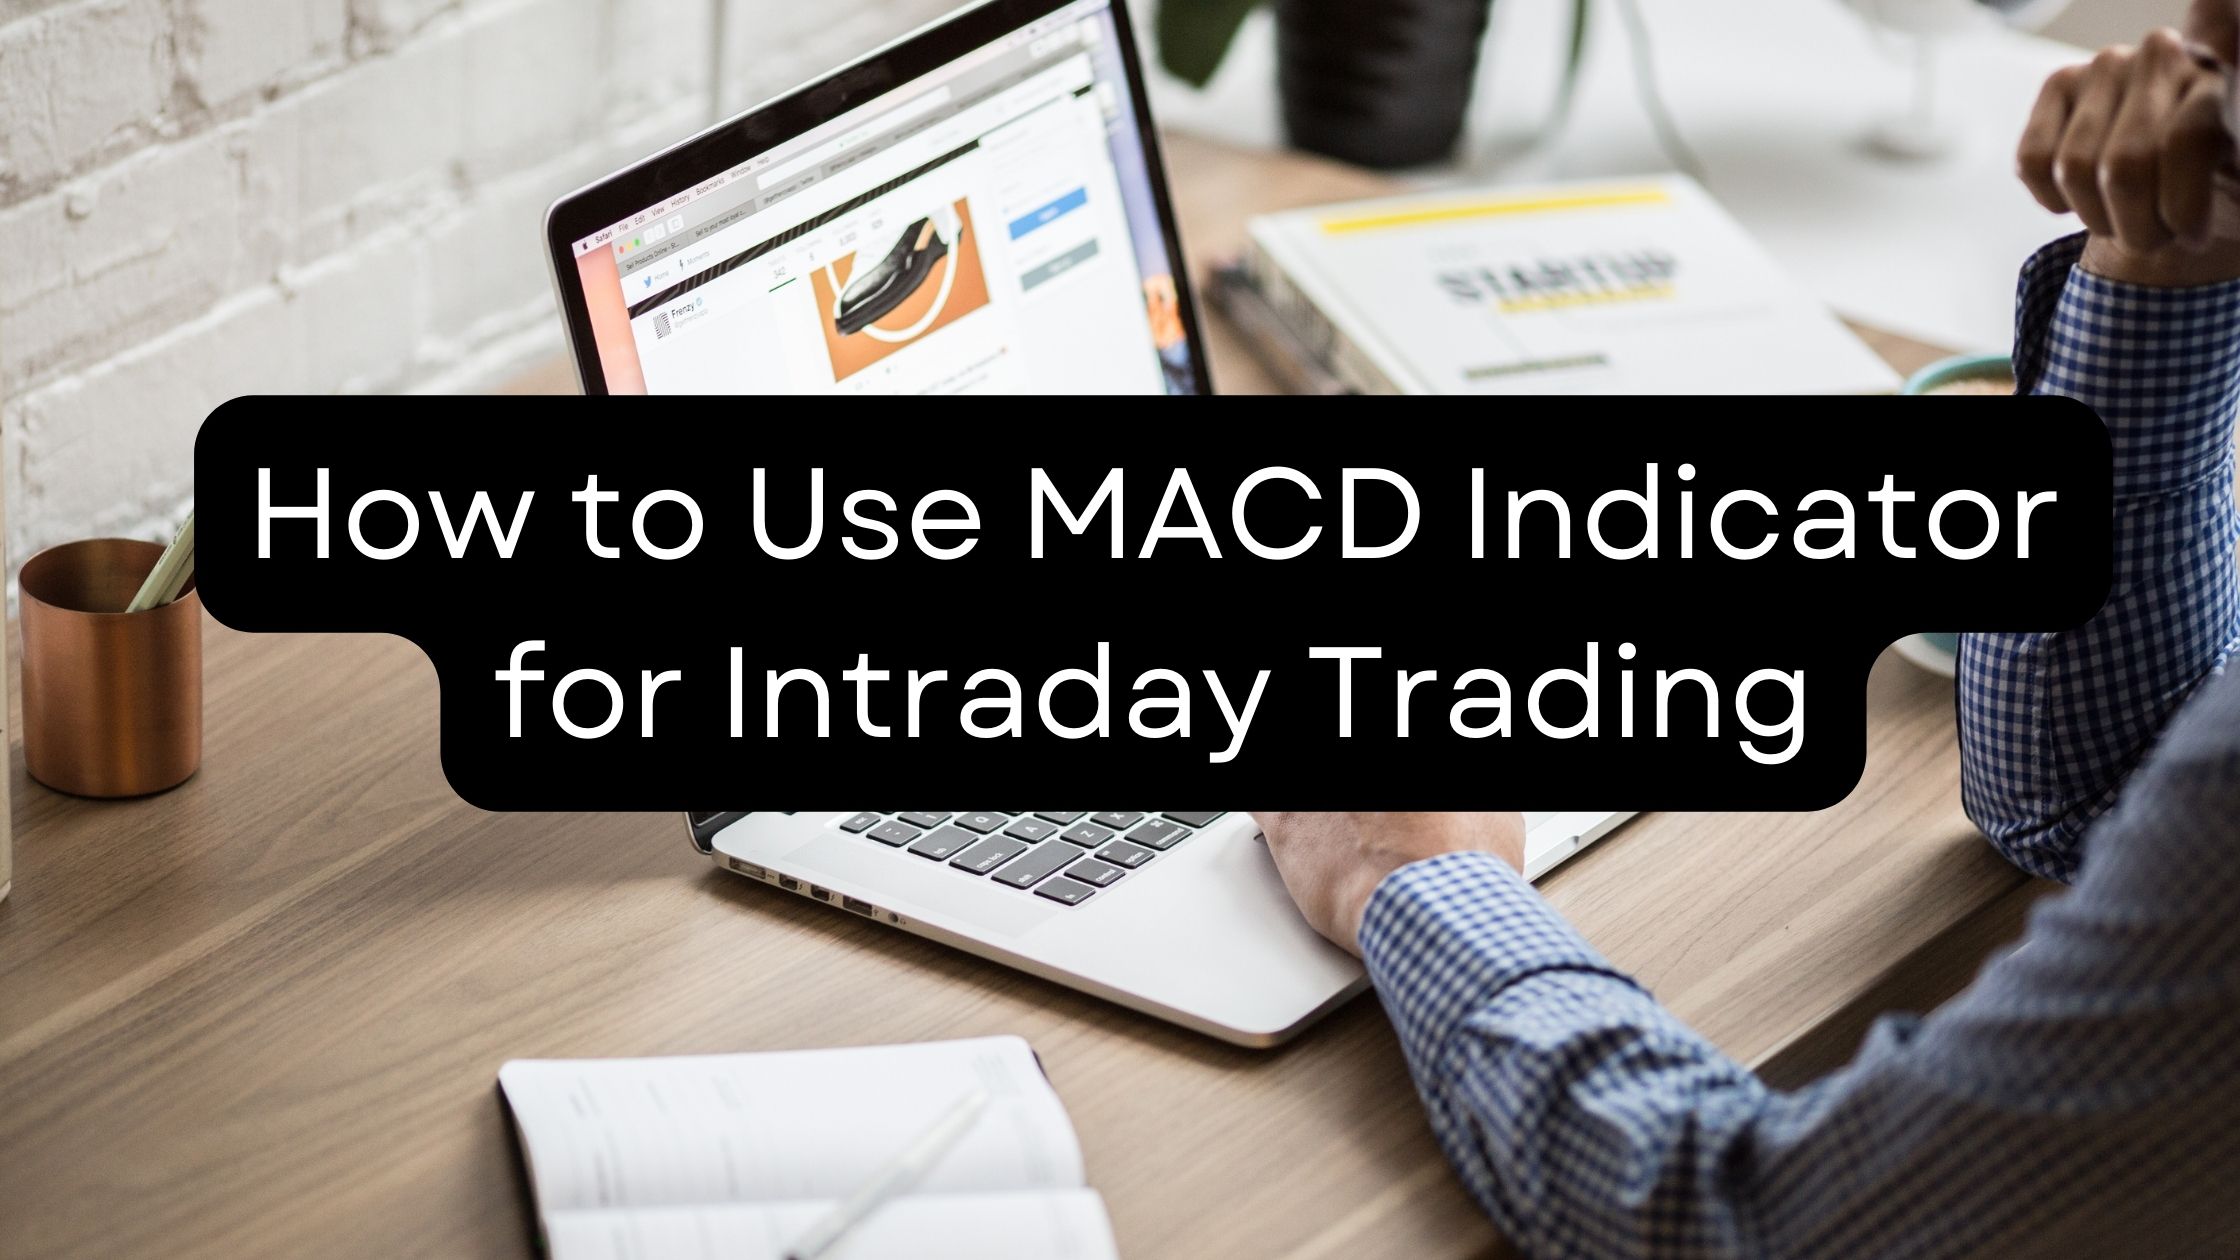 How to Use MACD Indicator for Intraday Trading